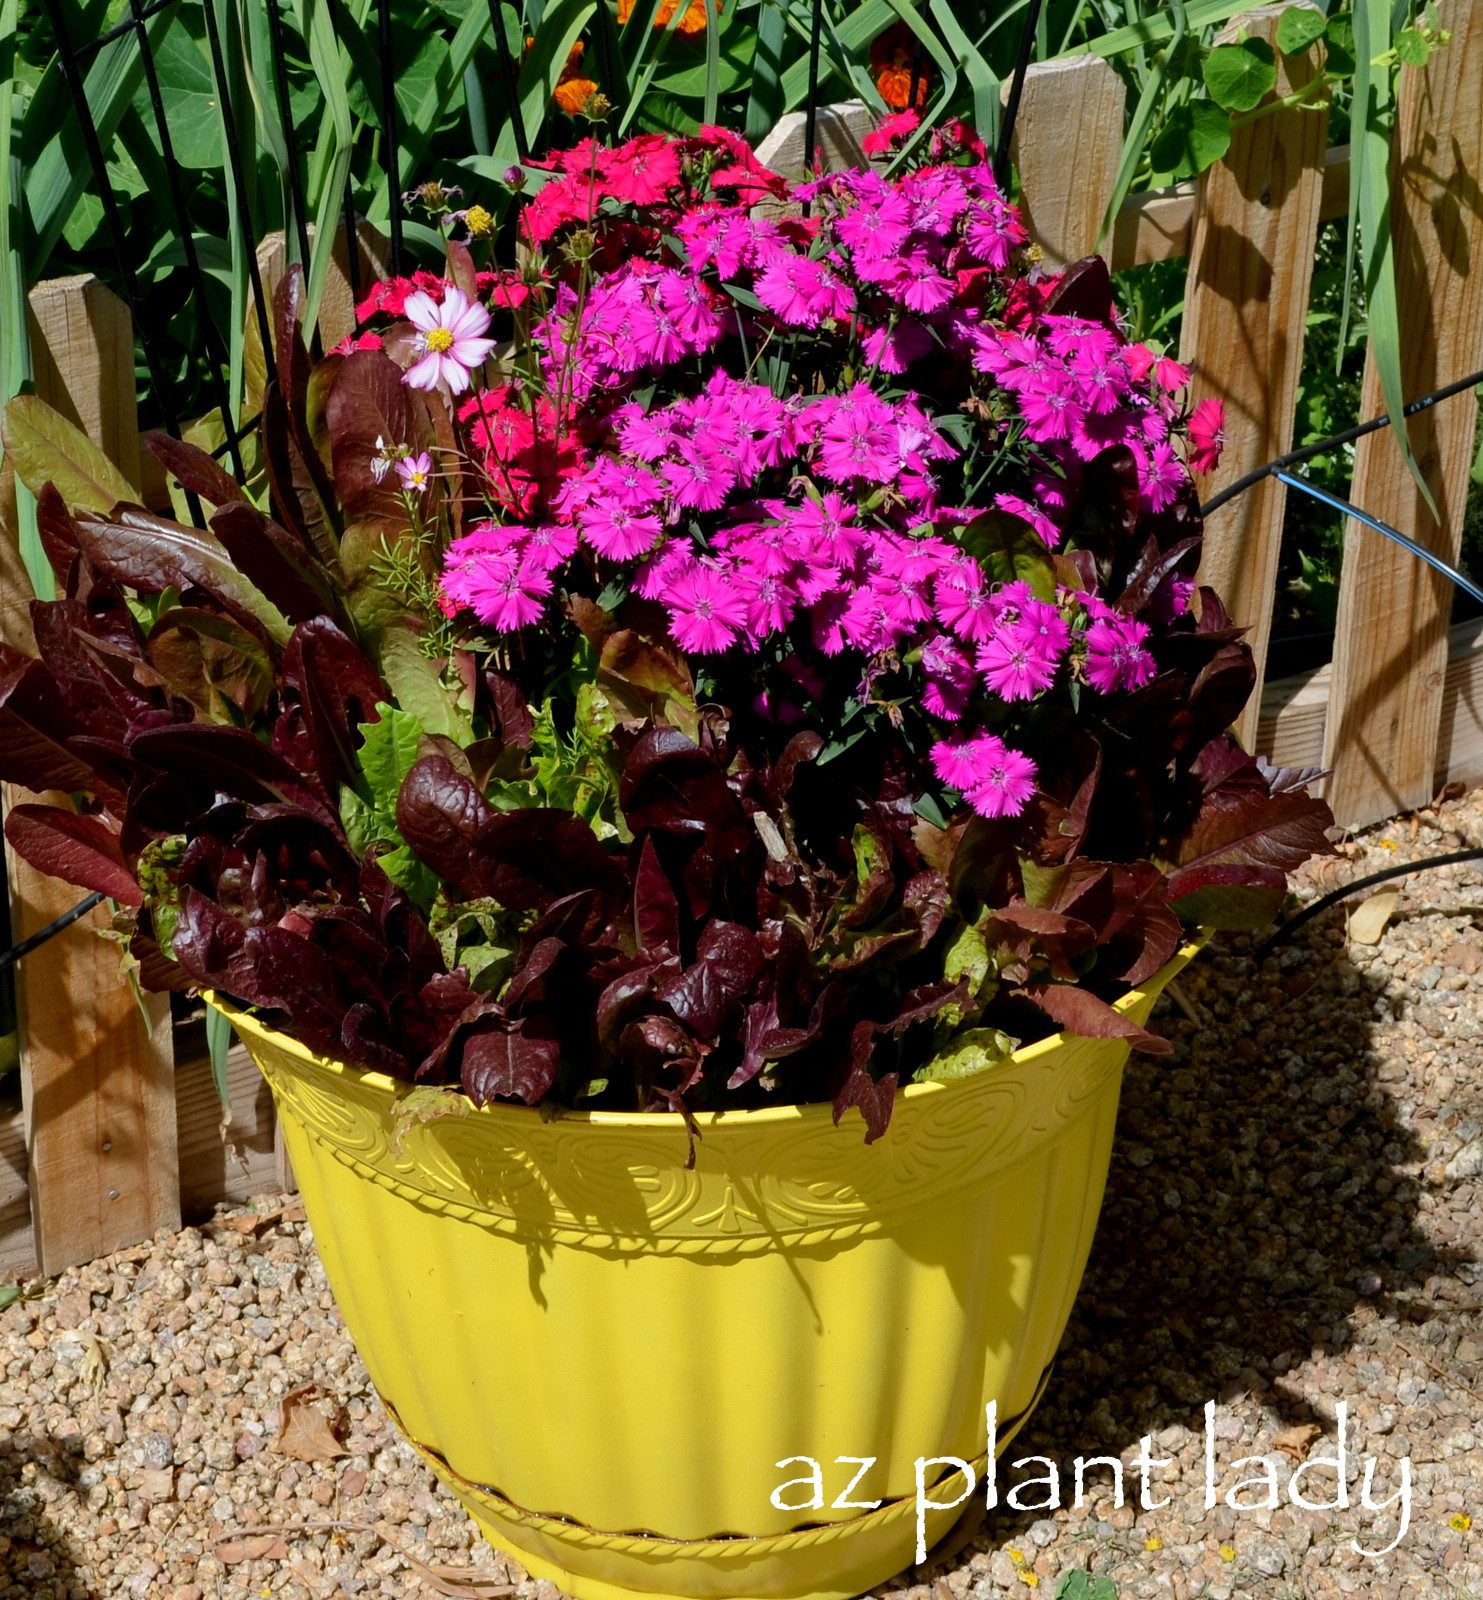 Companion Flowers for Vegetables to Grow in Containers